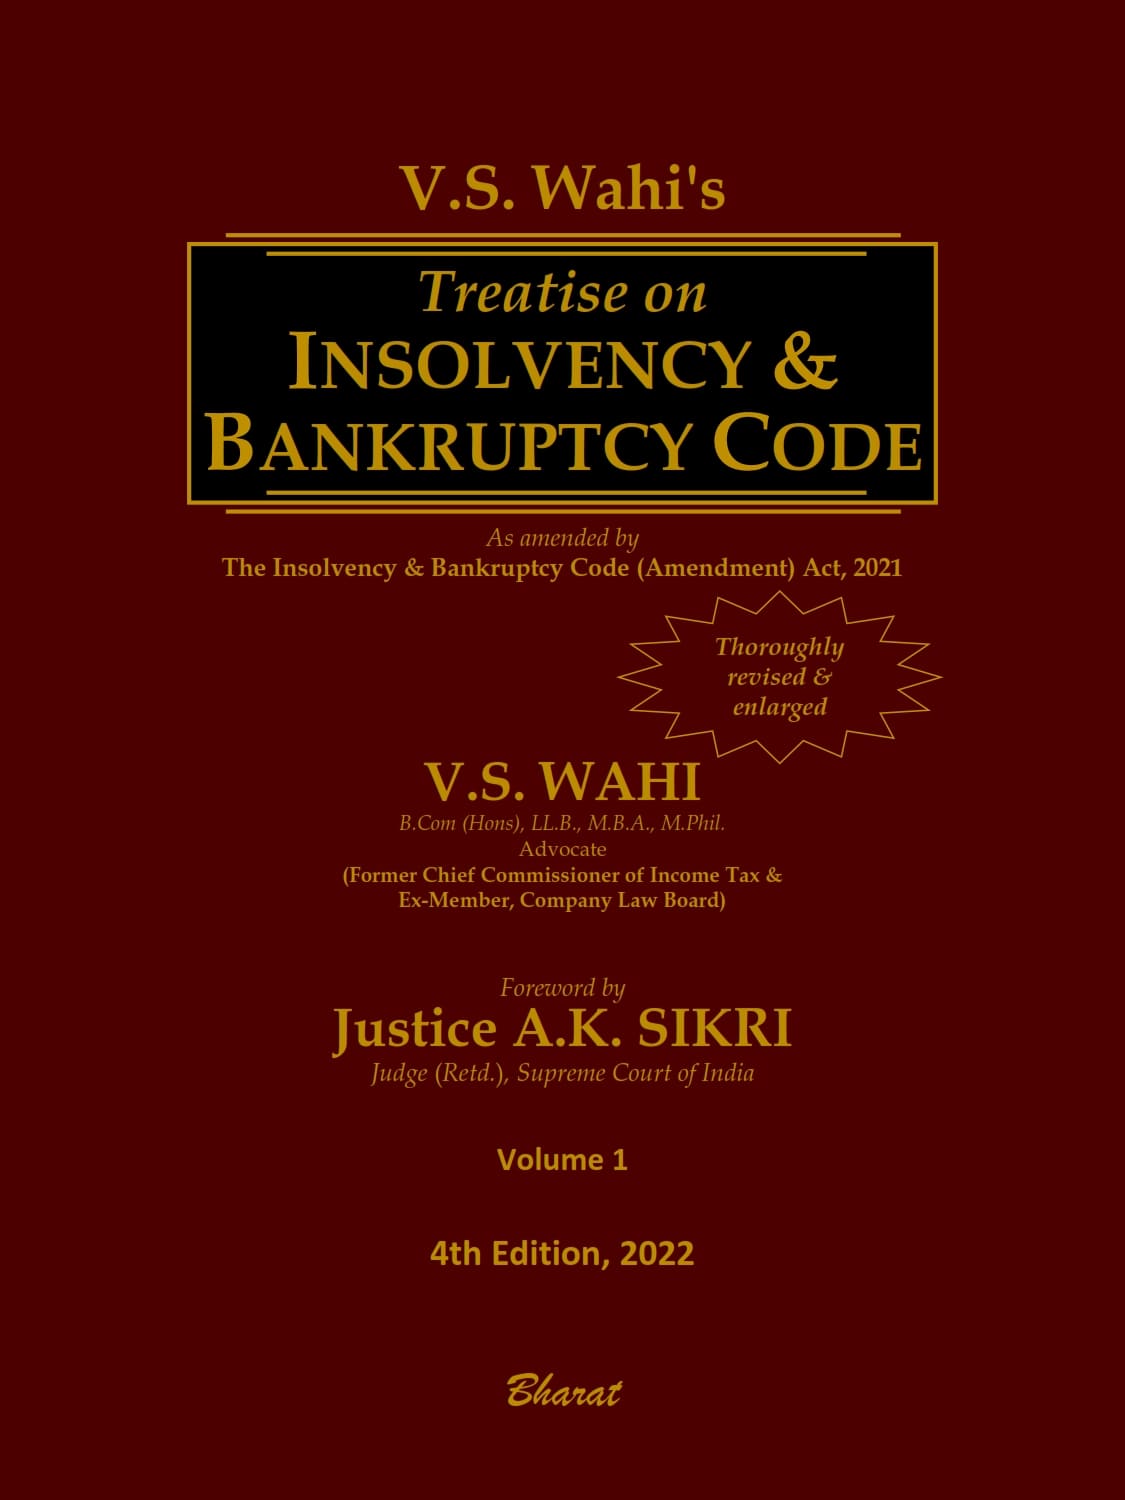 Treatise on INSOLVENCY & BANKRUPTCY CODE